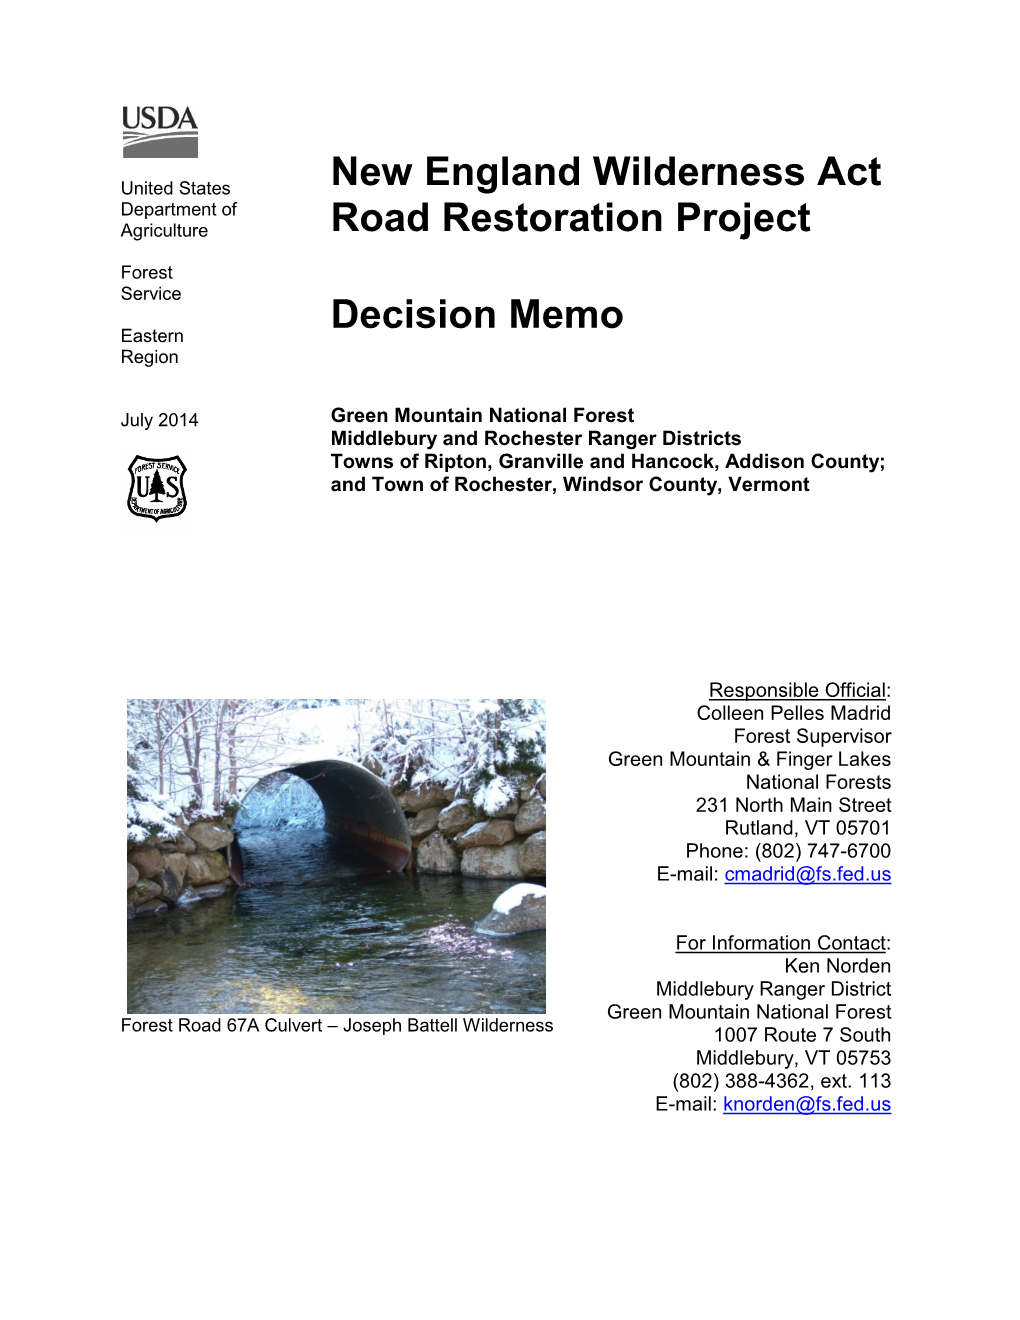 New England Wilderness Act Road Restoration Project Decision Memo